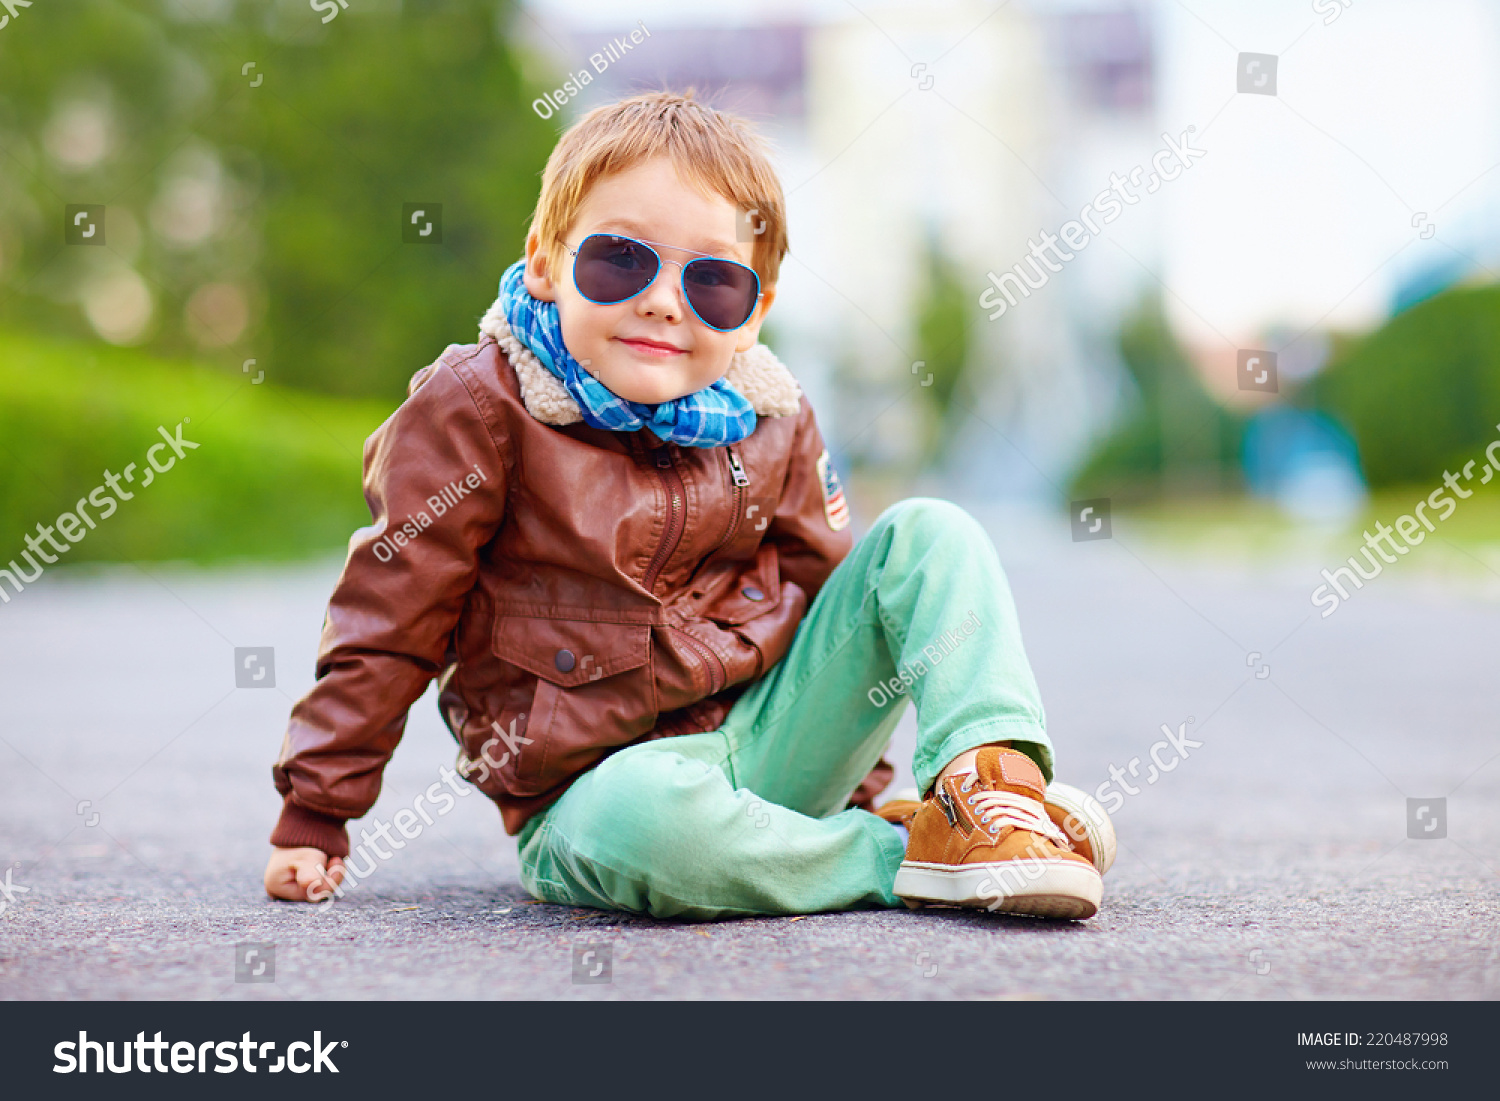 cute stylish boy in leather jacket sitting on the road #220487998